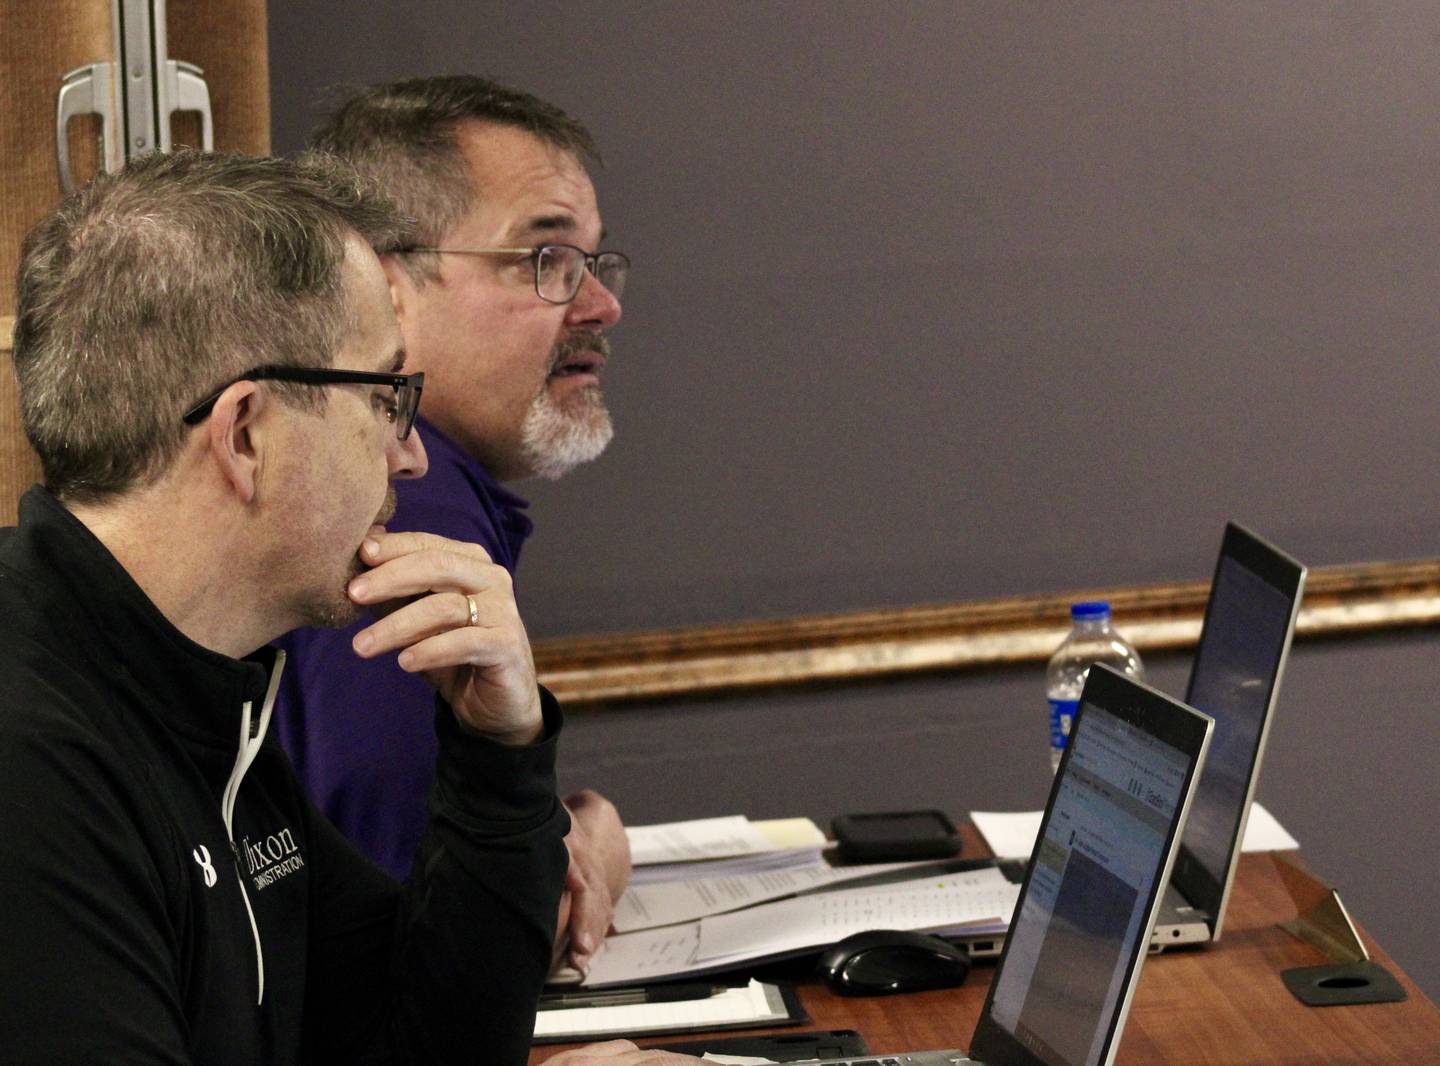 Doug Stansford, assistant superintendent, sits beside Marc Campbell, business manager, on Wednesday, Nov. 16, 2022, during a regular meeting of the board of education for Dixon Public Schools. Stansford briefed the board on curriculum development and Campbell on the legal requirement to conduct a truth in taxation hearing in December.